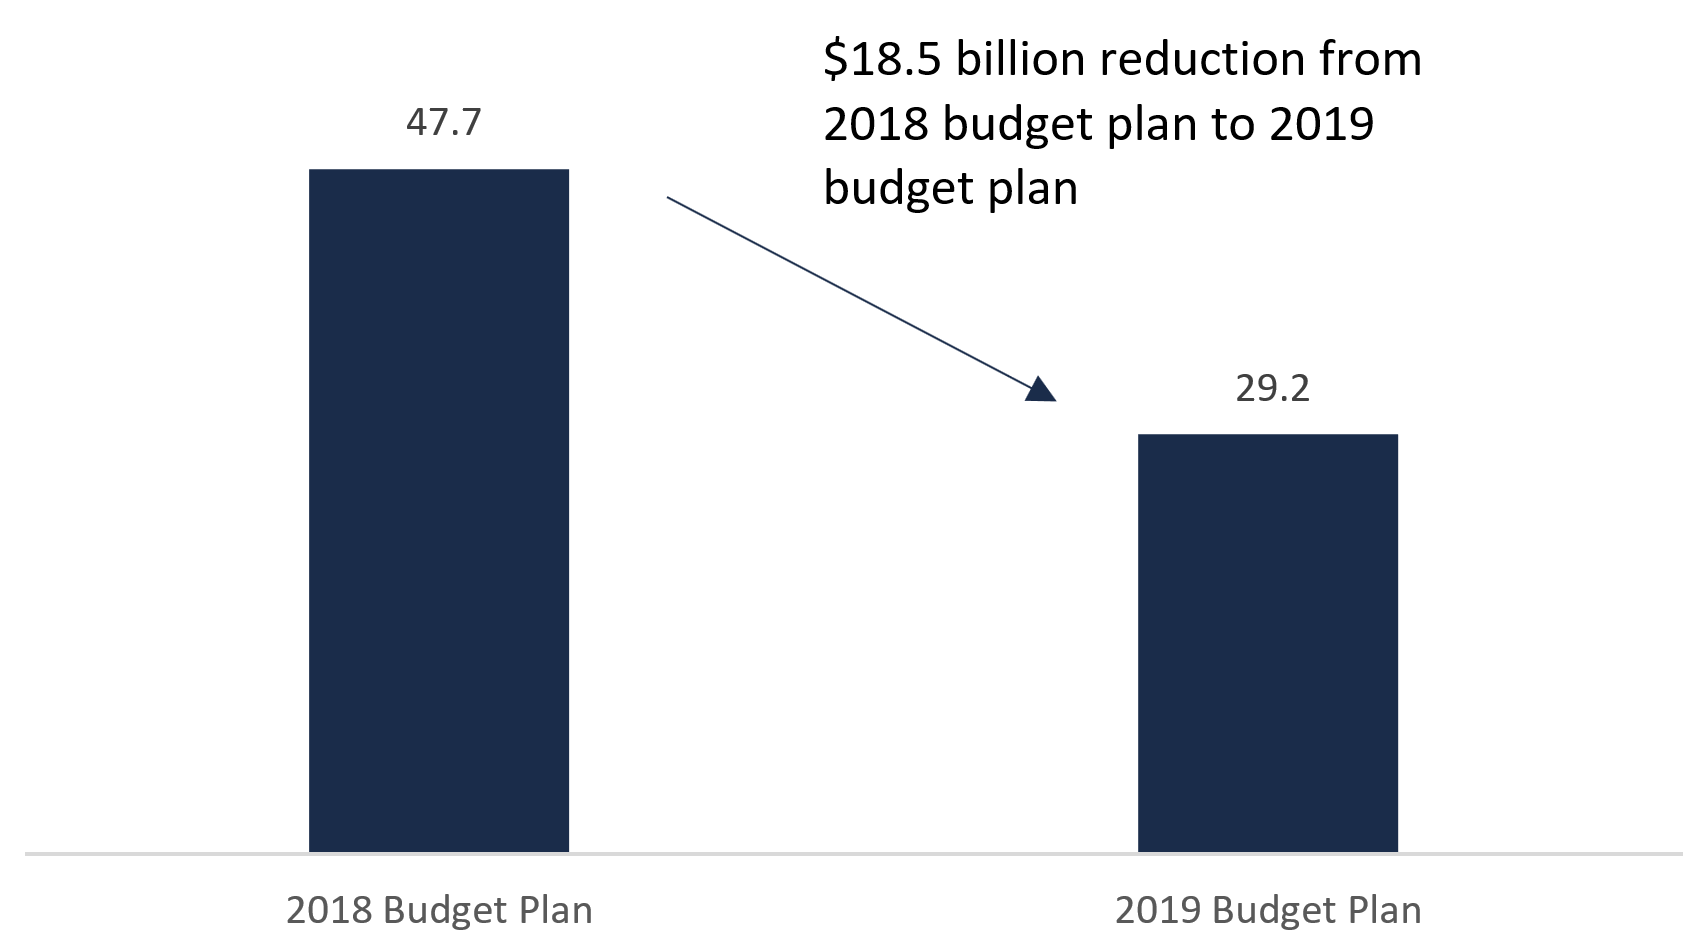 This figure shows the projected transit capital spending from 2019-20 to 2023-24 as stated in the 2018 budget plan and the 2019 budget plan in billions of dollars. The figure shows that the 2018 budget plan transit capital spending projection was $47.7 billion and the transit capital spending projection from the 2019 budget plan is $29.2 billion. This chart highlights that there is an $18.5 billion reduction from the 2018 budget plan to the 2019 budget plan.